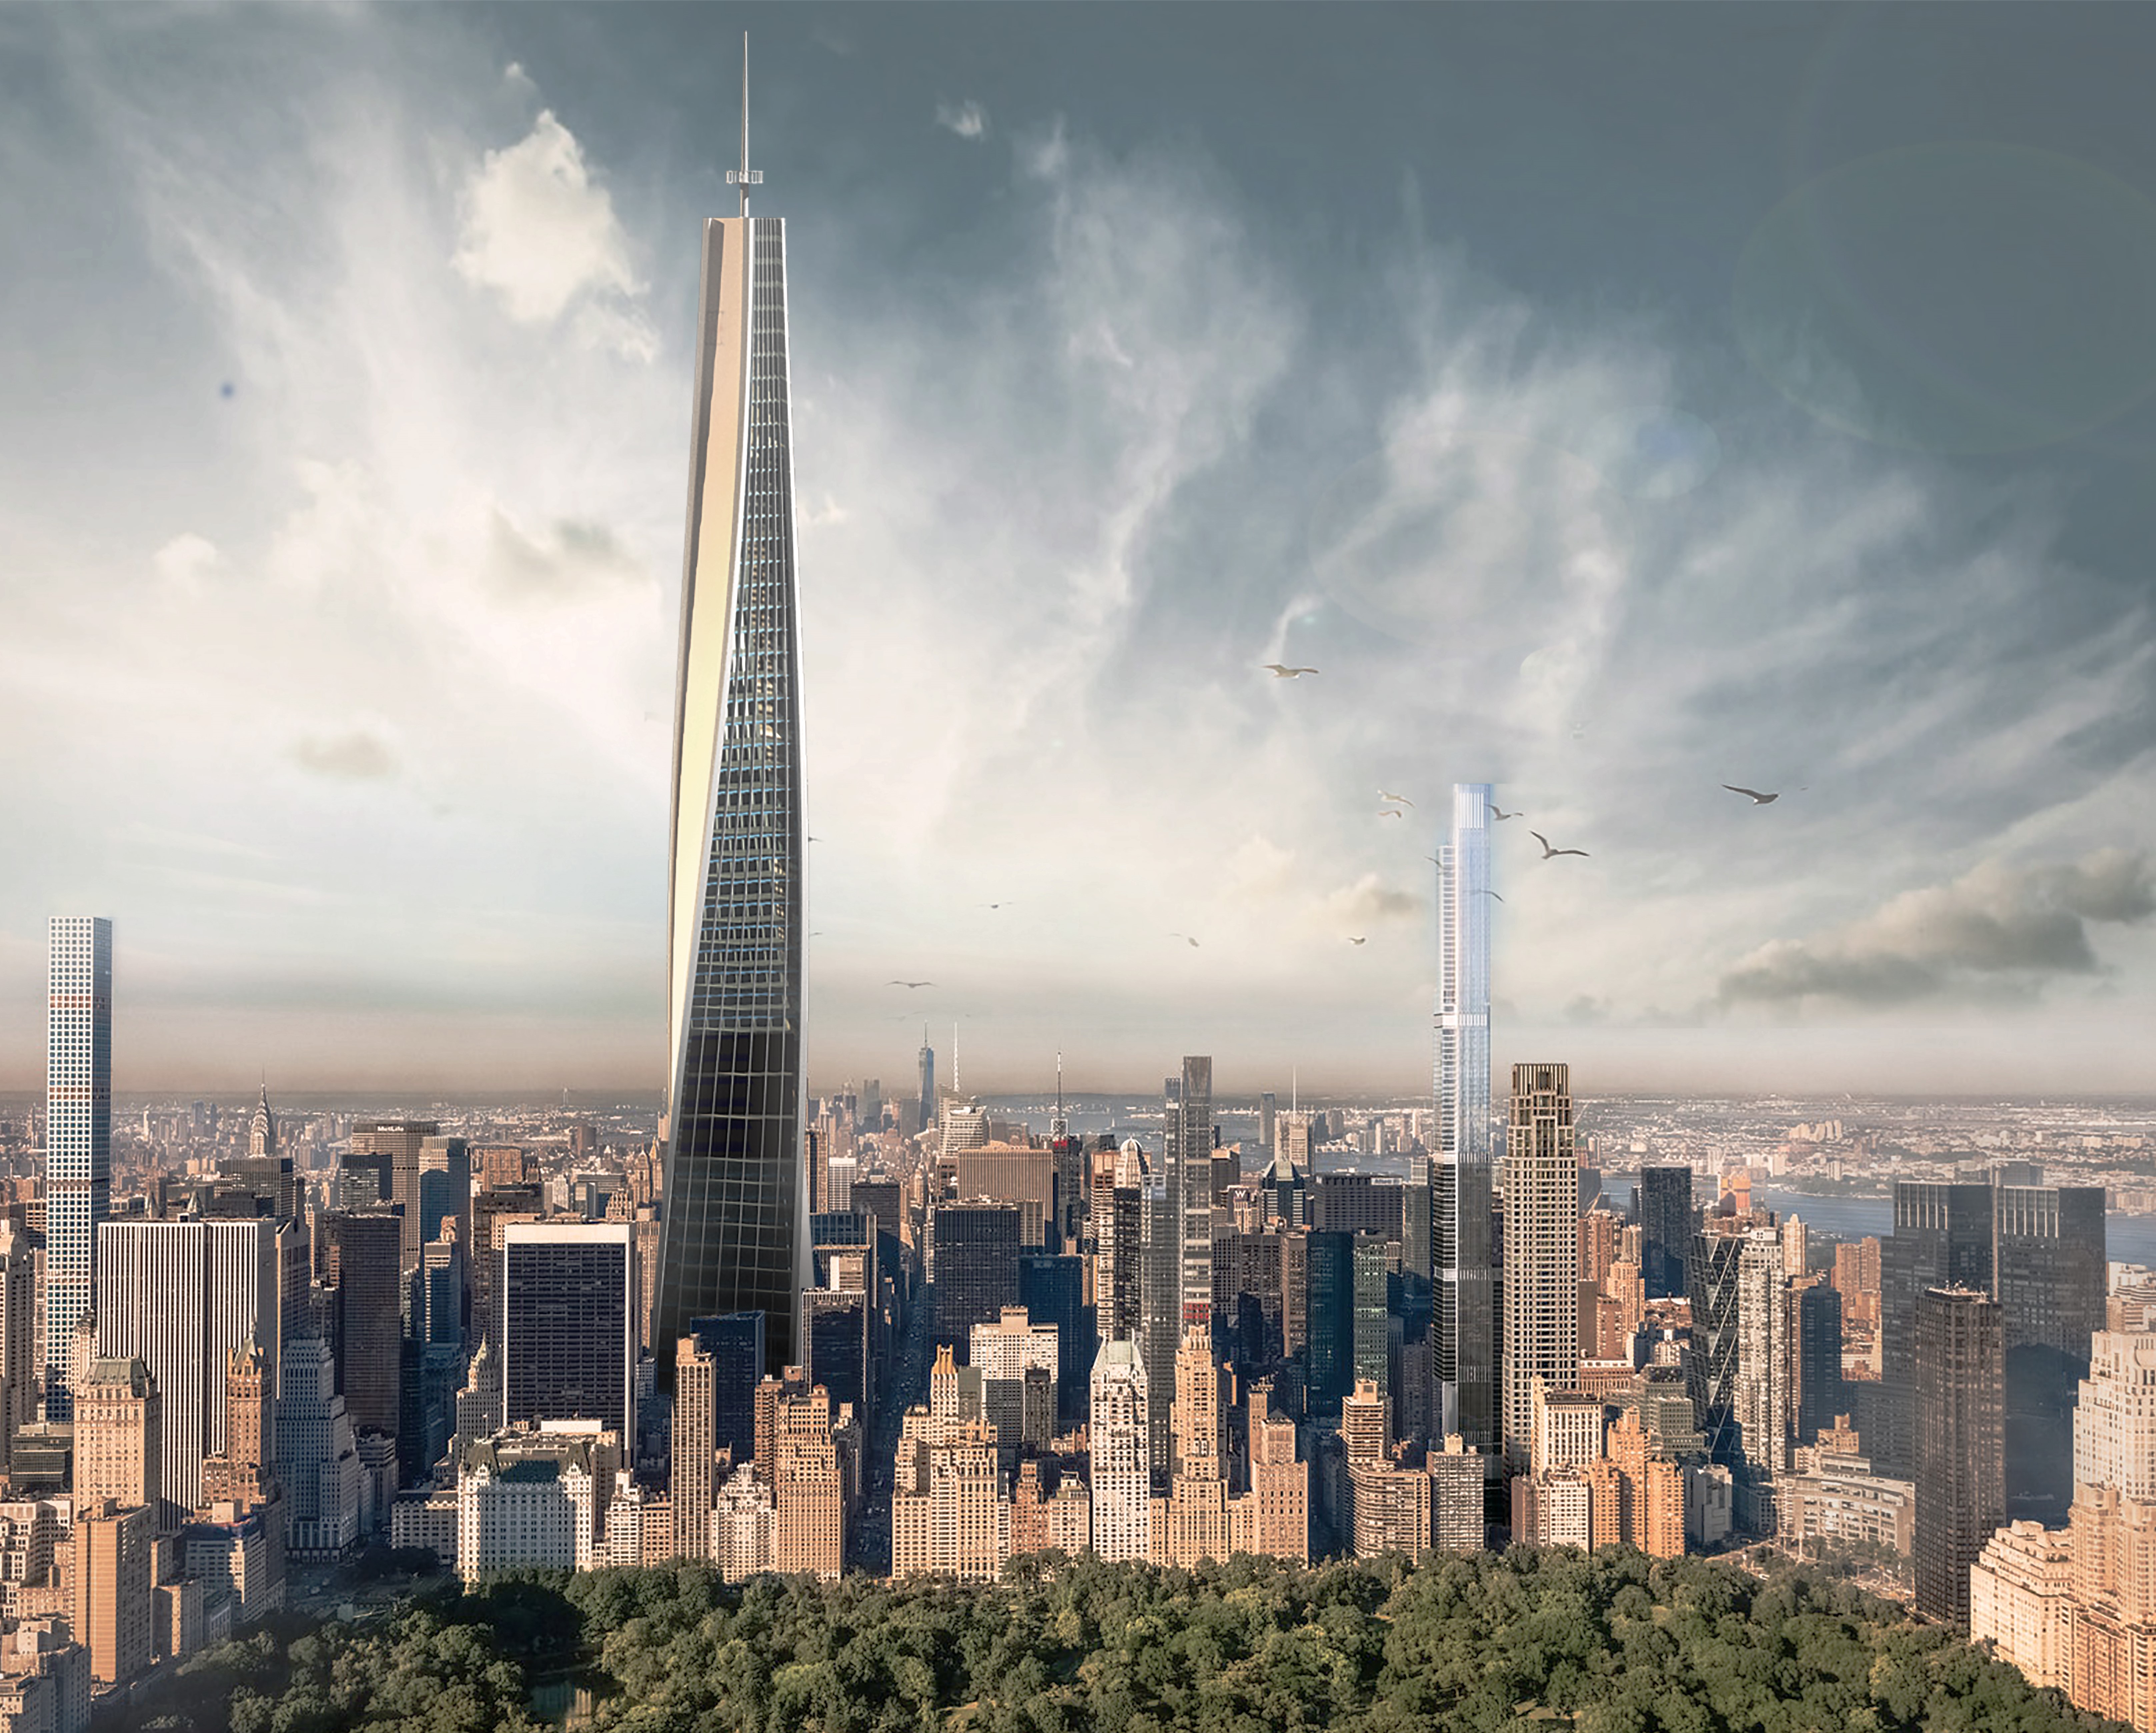 Sky-high: A Critique of NYC's Supertall Towers from Top to Bottom